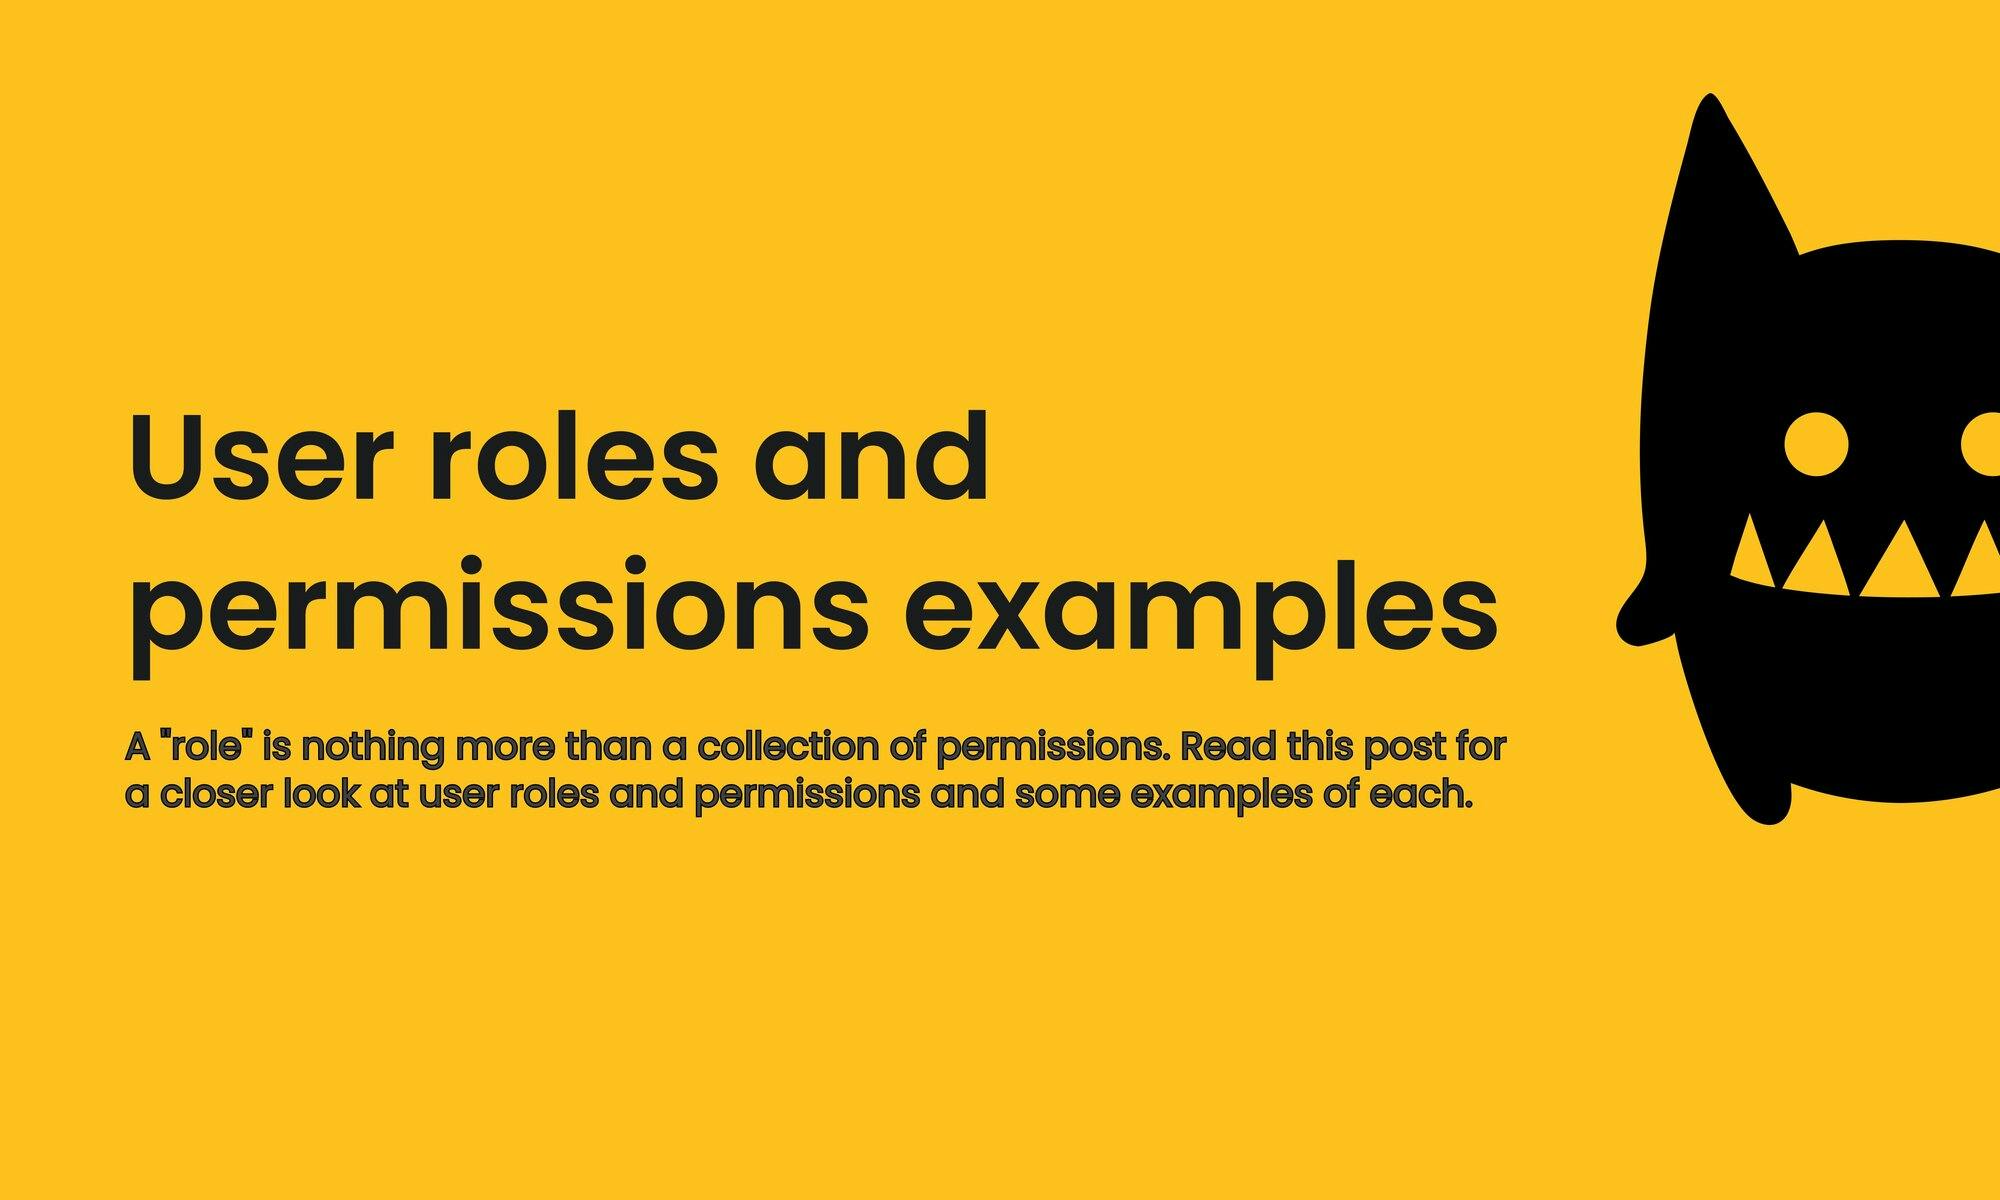 User roles and permissions examples